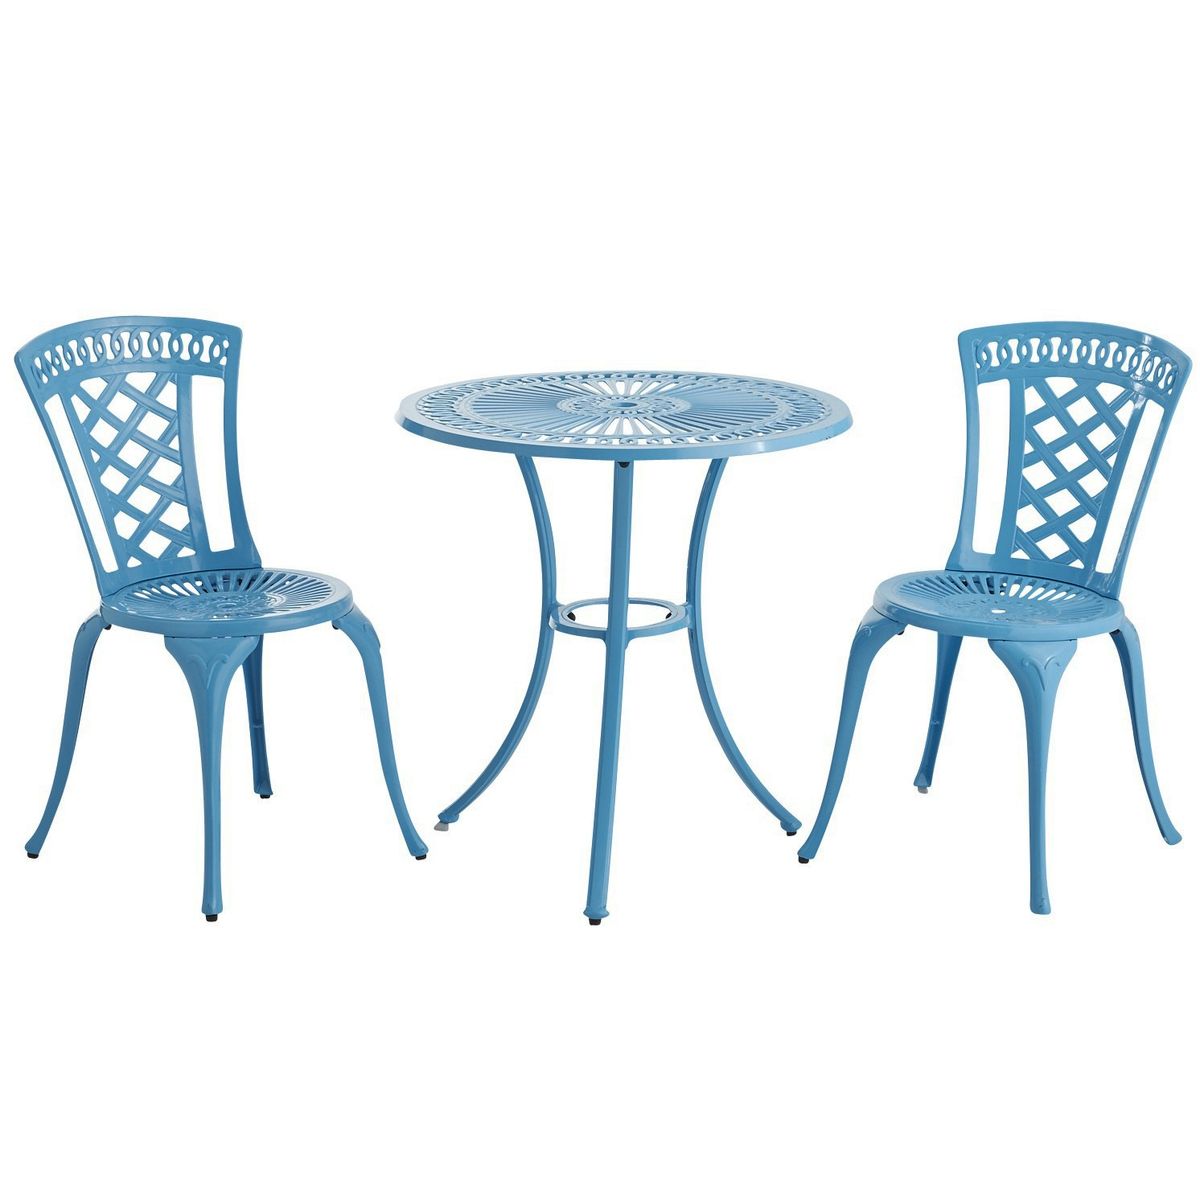 A Neely Bistro Set in peacock blue adds unexpected, fun color to a patio or small terrace.